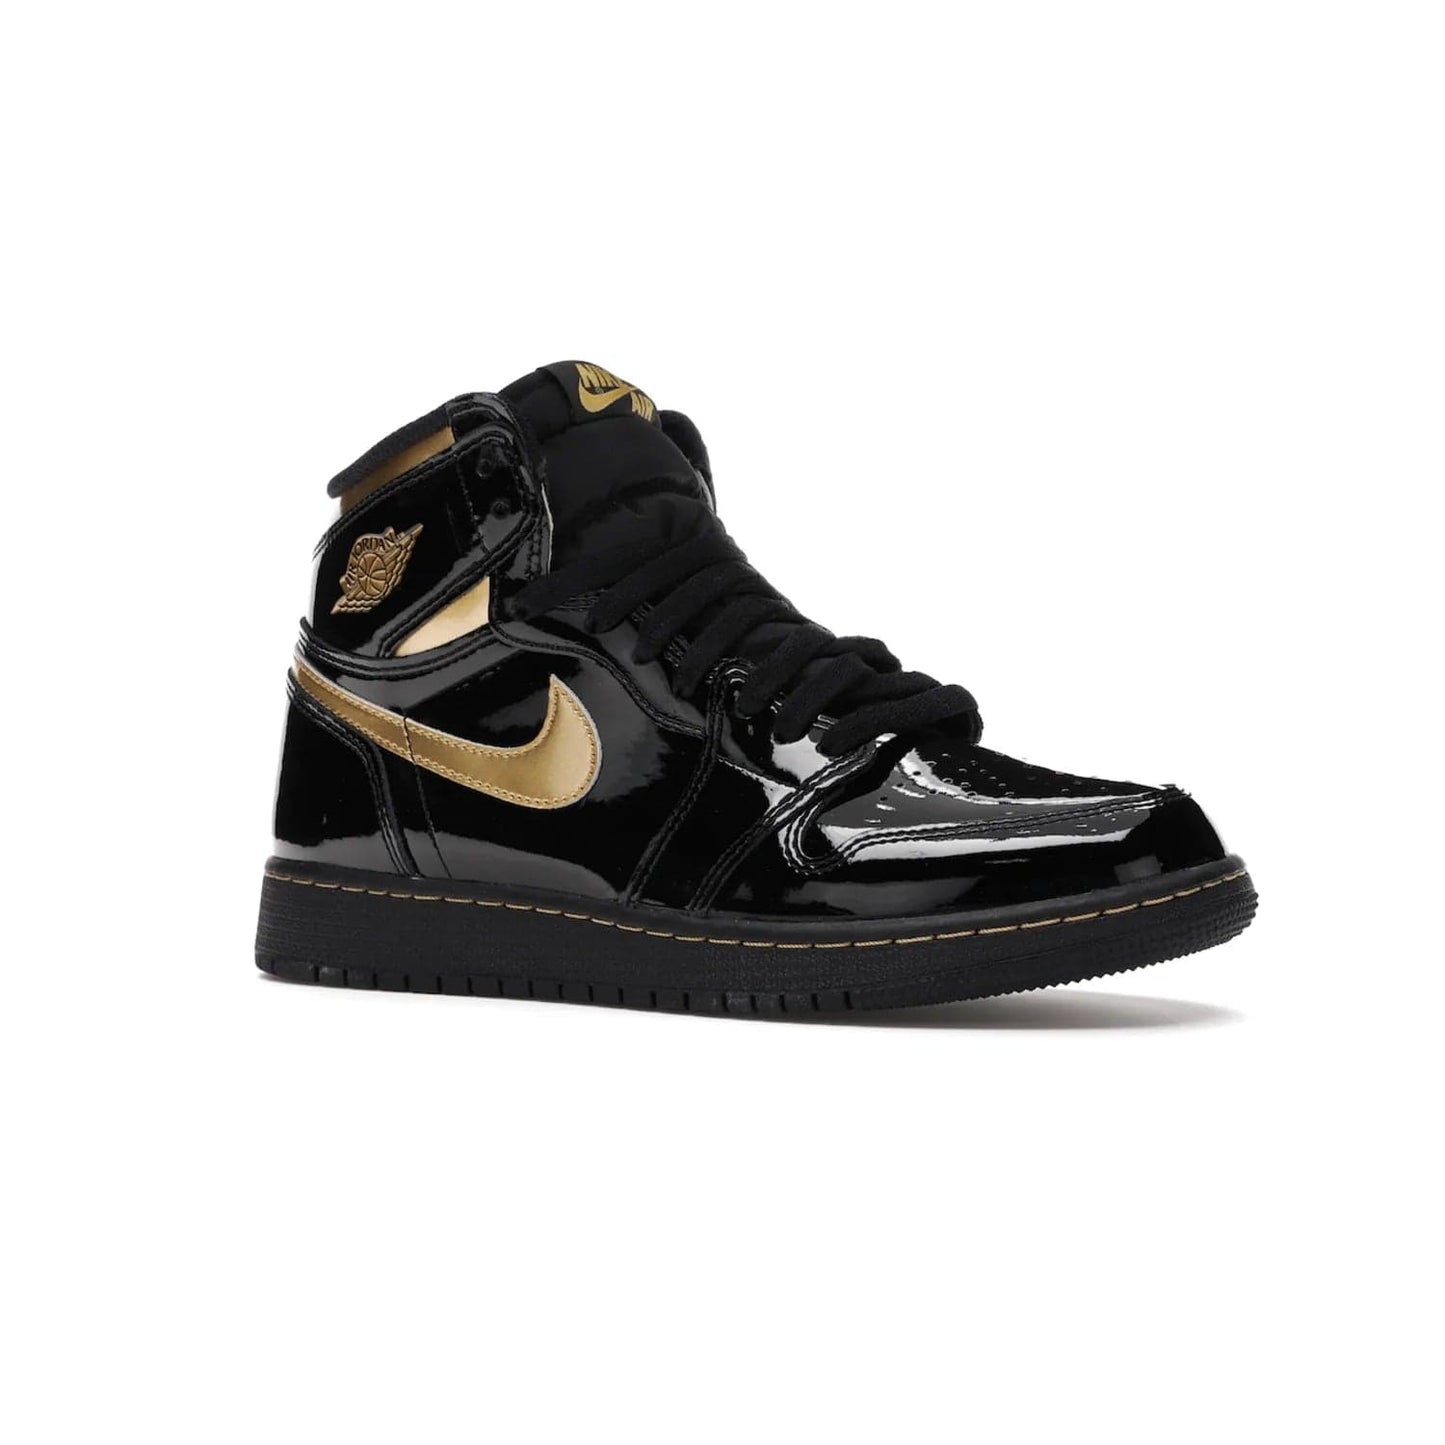 Jordan 1 Retro High Black Metallic Gold (2020) (GS) - Image 4 - Only at www.BallersClubKickz.com - Shop the Kids Air Jordan 1 Retro High in Black Metallic Gold for a stylish and comfortable sneaker kids can love. Featuring black and metallic gold patent leather uppers, metallic gold accents, and an Air sole unit for extra cushioning.